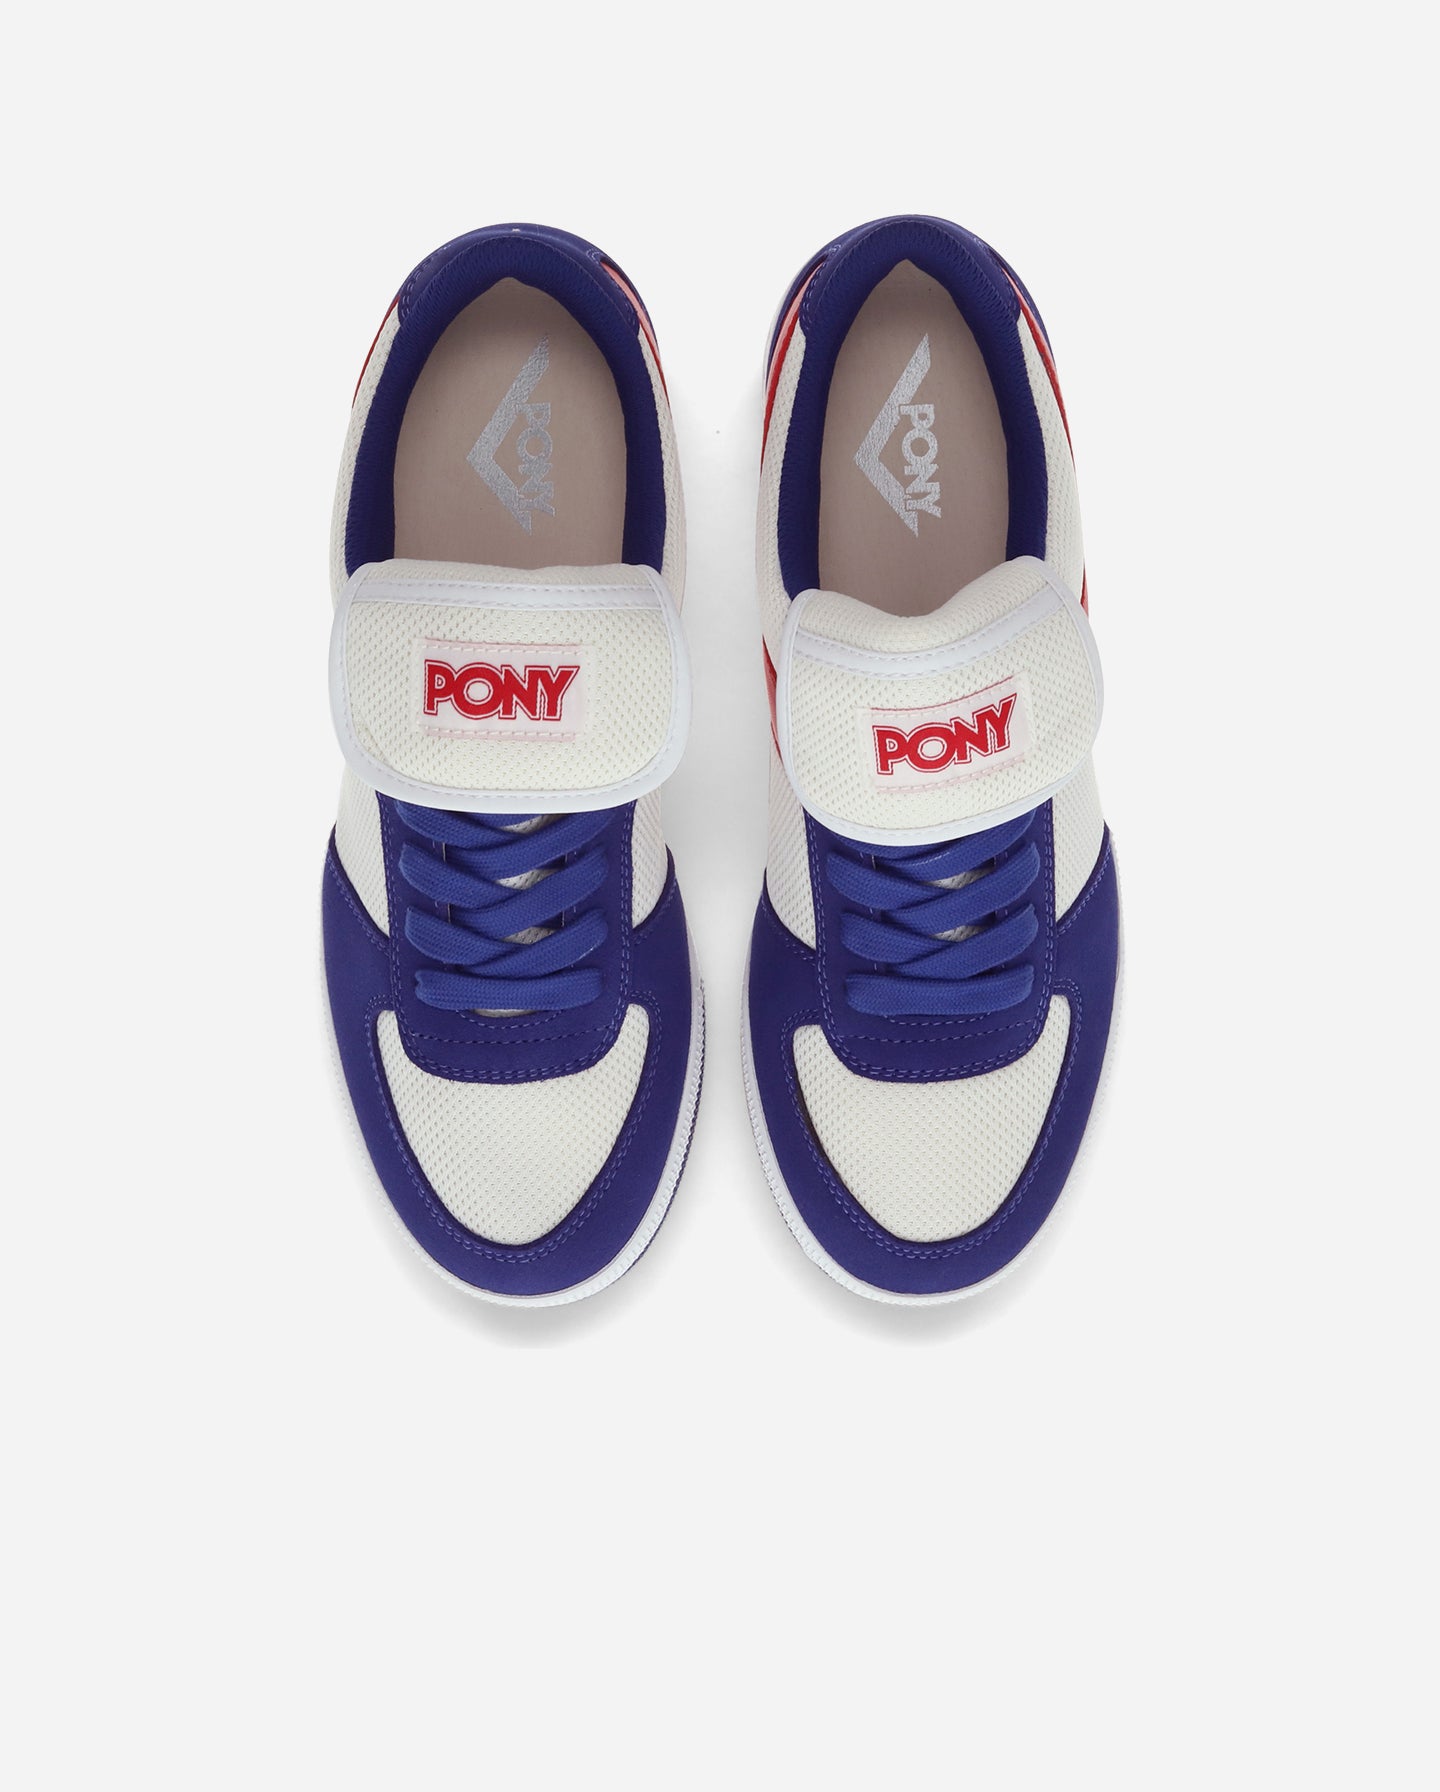 pony apparel and shoes